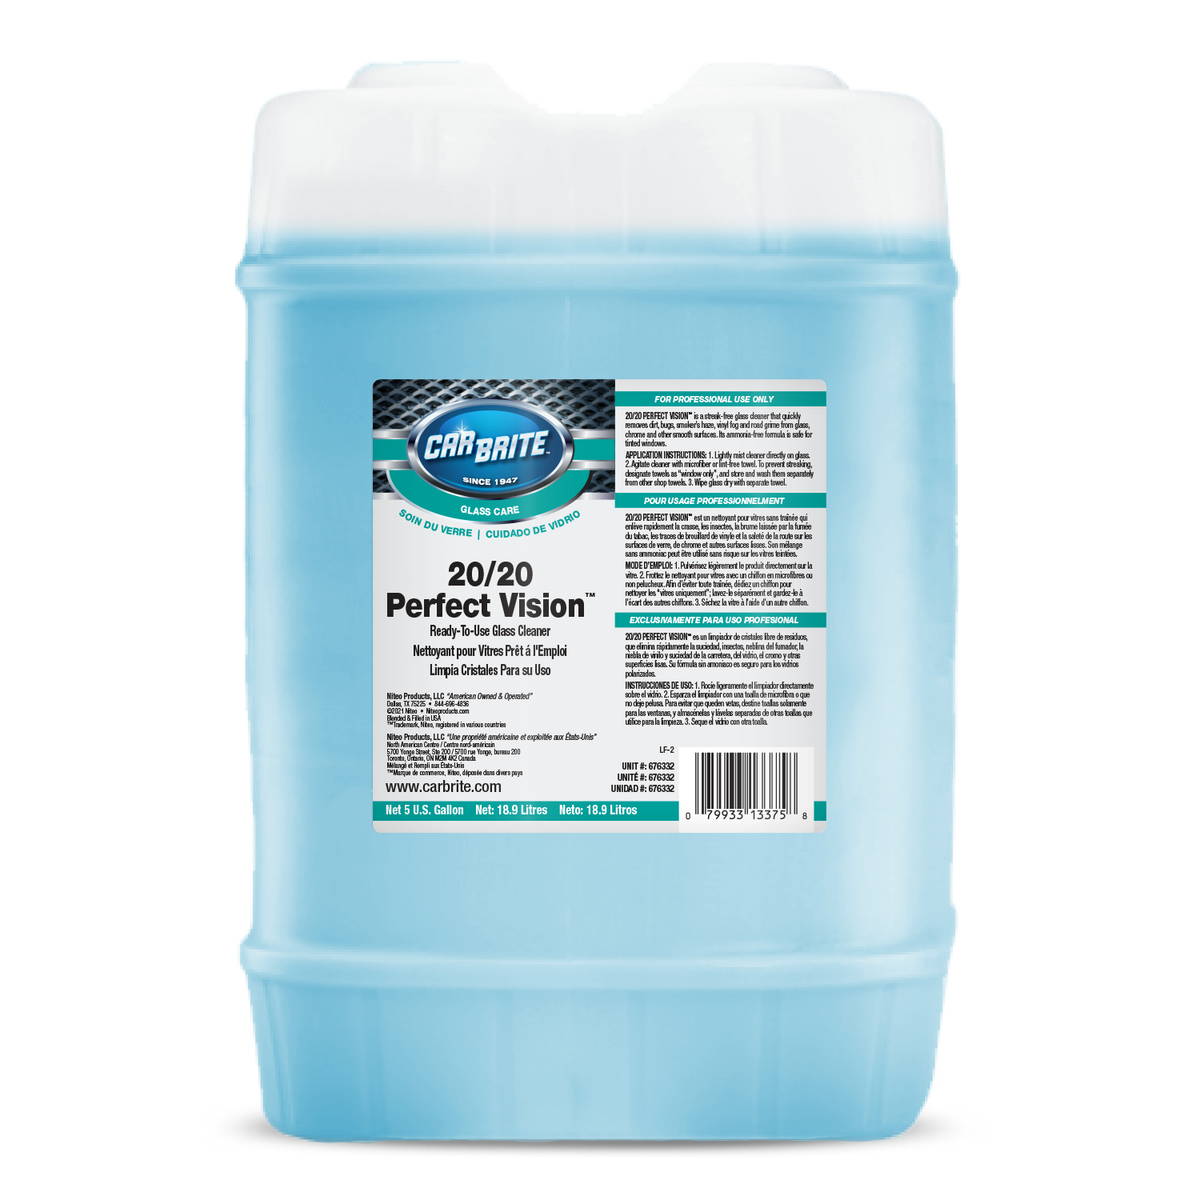 DP 20/20 Vision Glass Cleaner uses an alcohol-based formula to